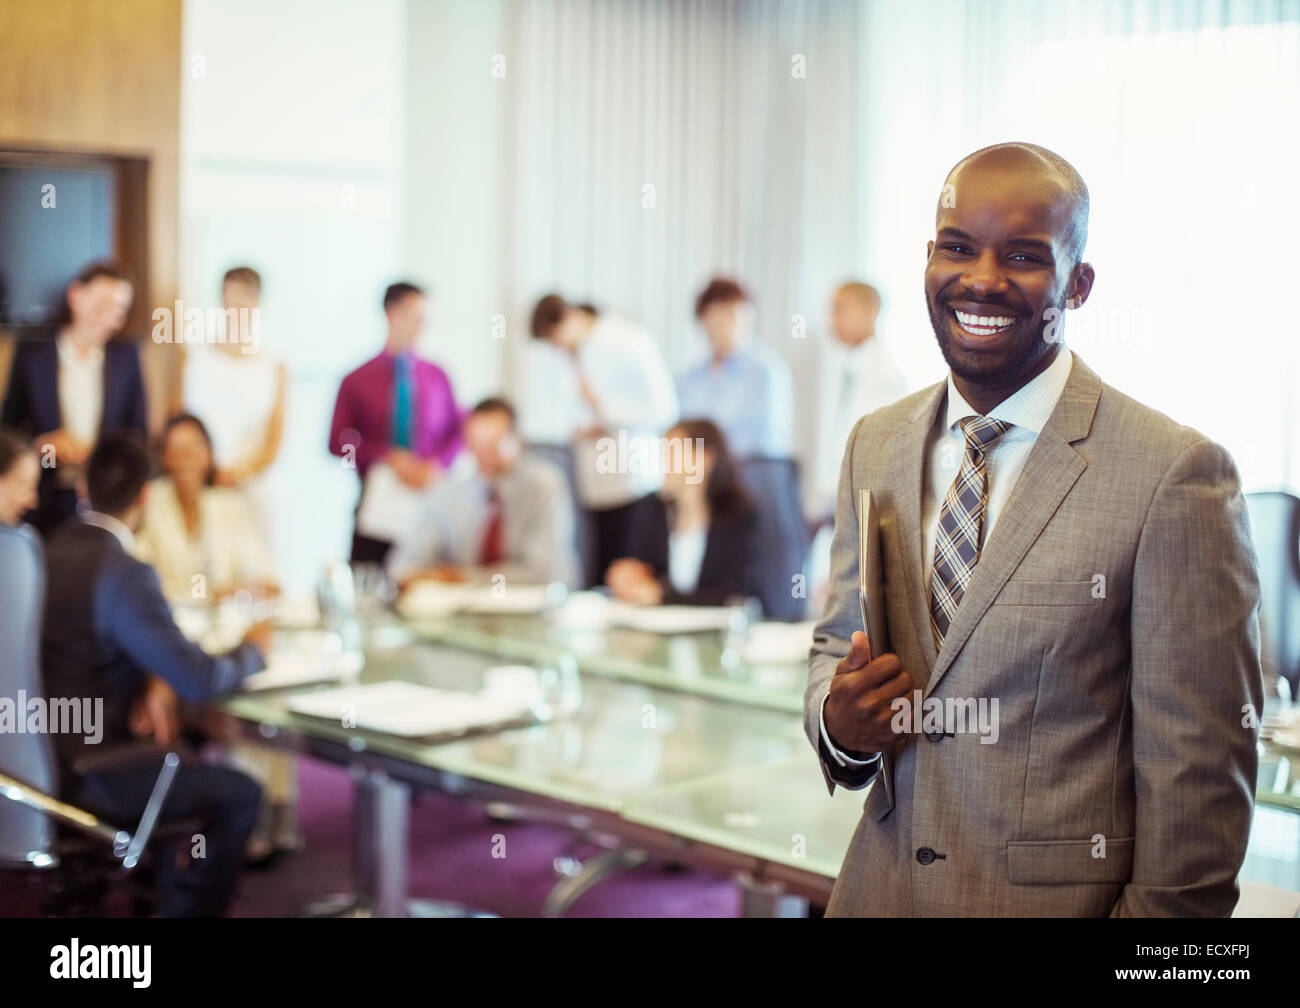 Portrait of smiling young man wearing suit and holding laptop in conference room Stock Photo